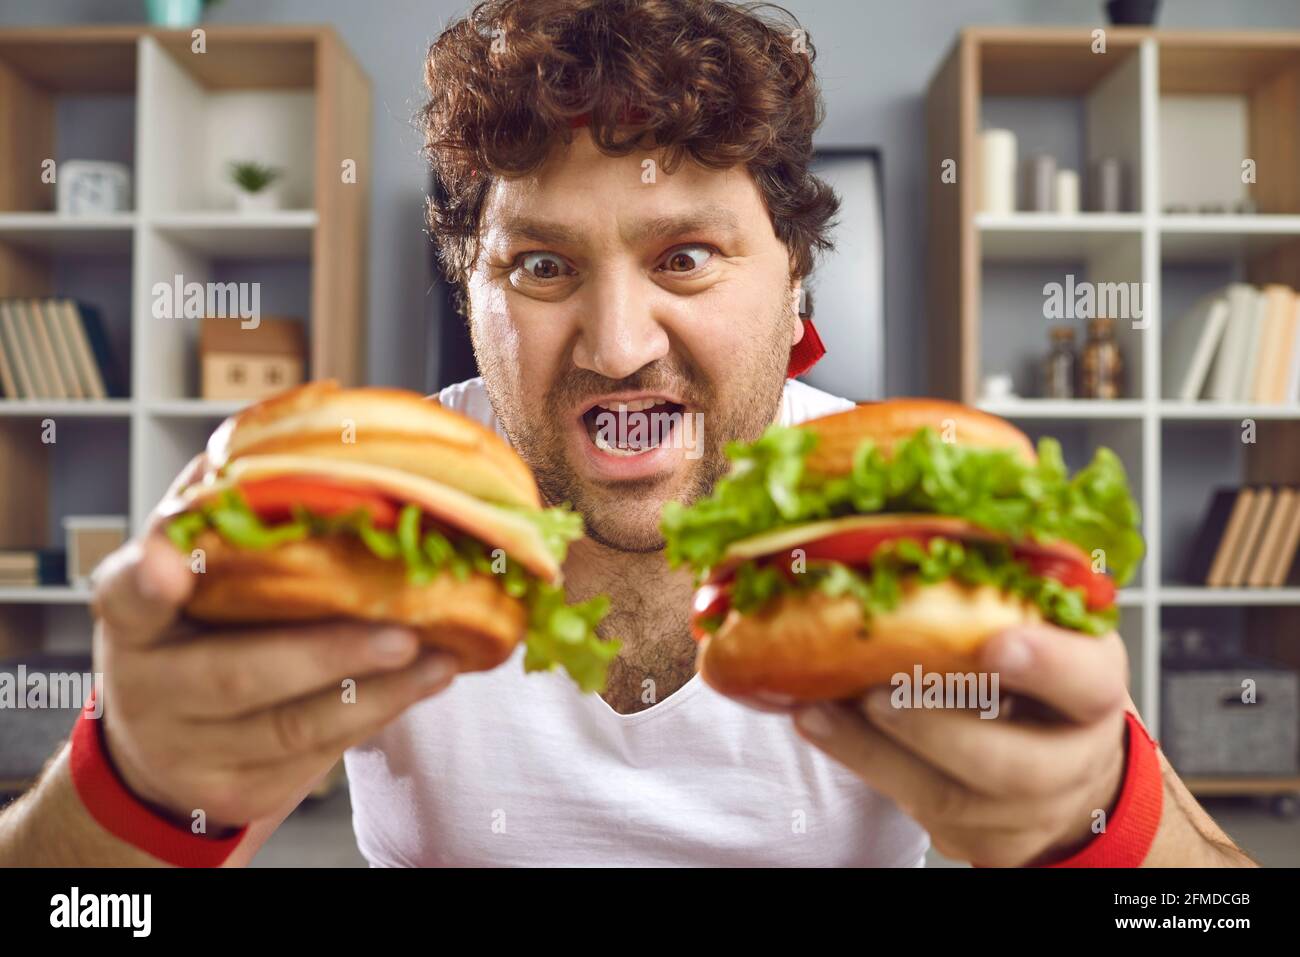 Hungry chubby man looking at two delicious hamburgers with funny face expression Stock Photo